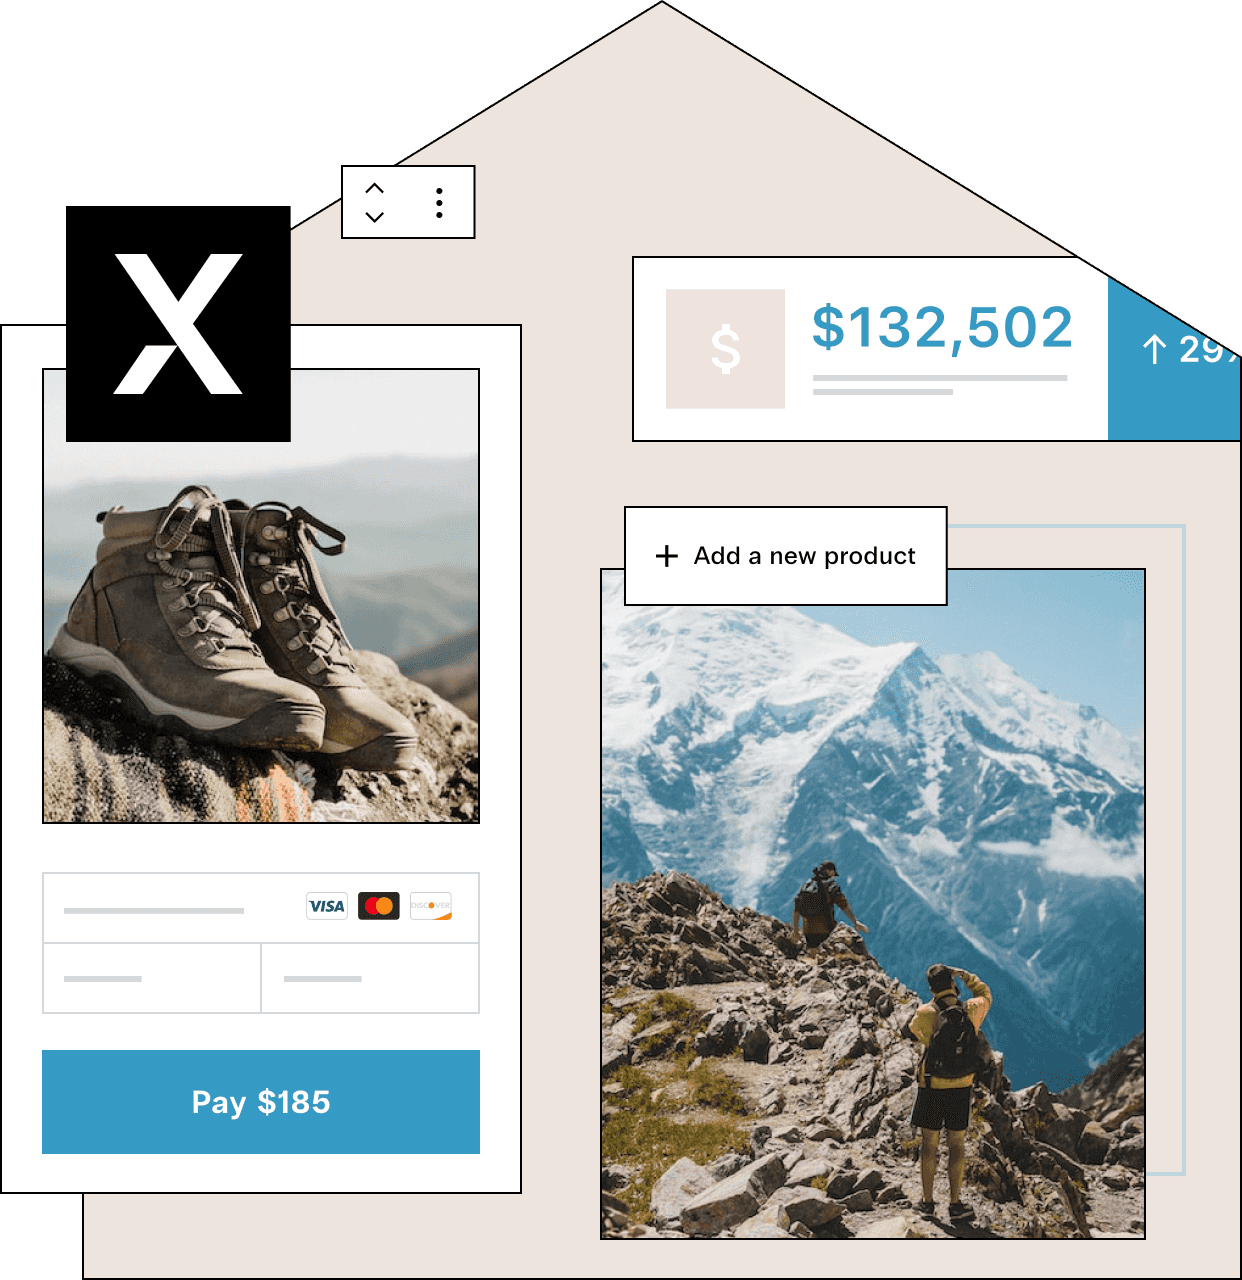 Snapshots of an online store with a adventurous aesthetic selling hiking boots and gear for $185, revenue shows 29% growth